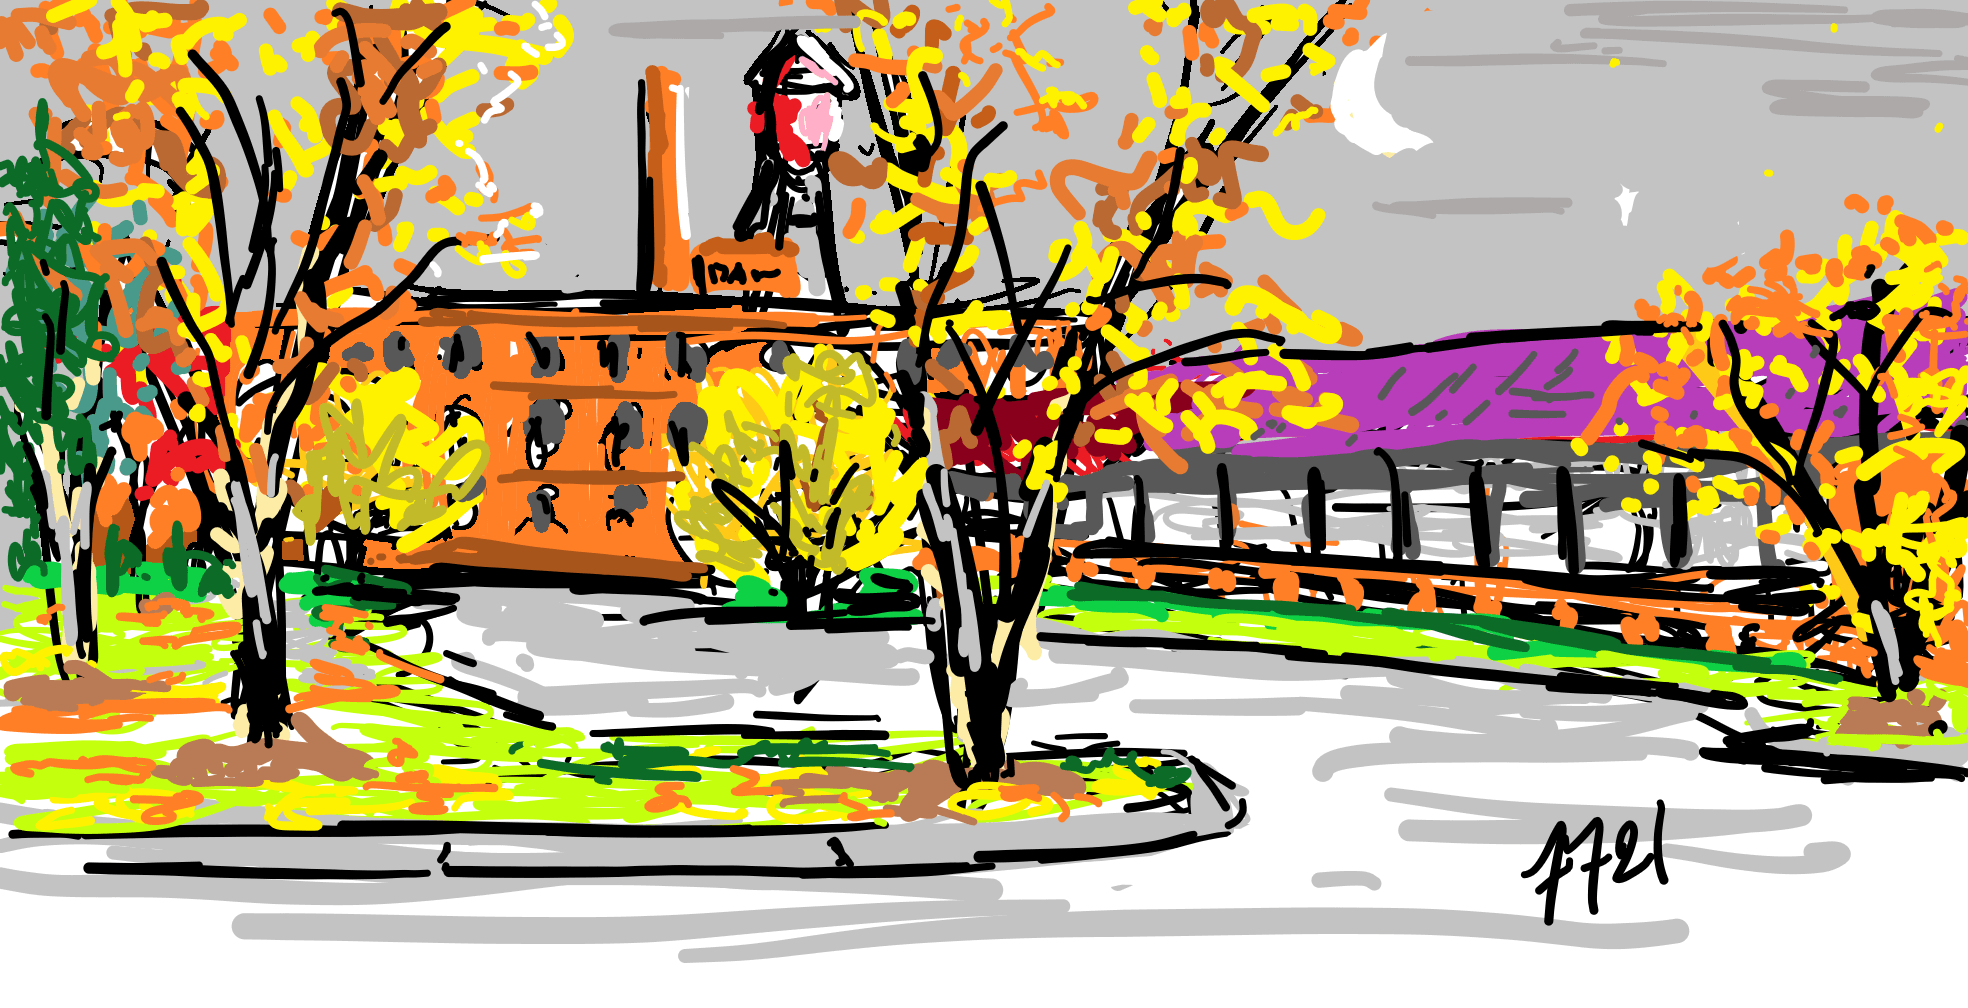 Illustrated landscape image with yellow tree and red water tower